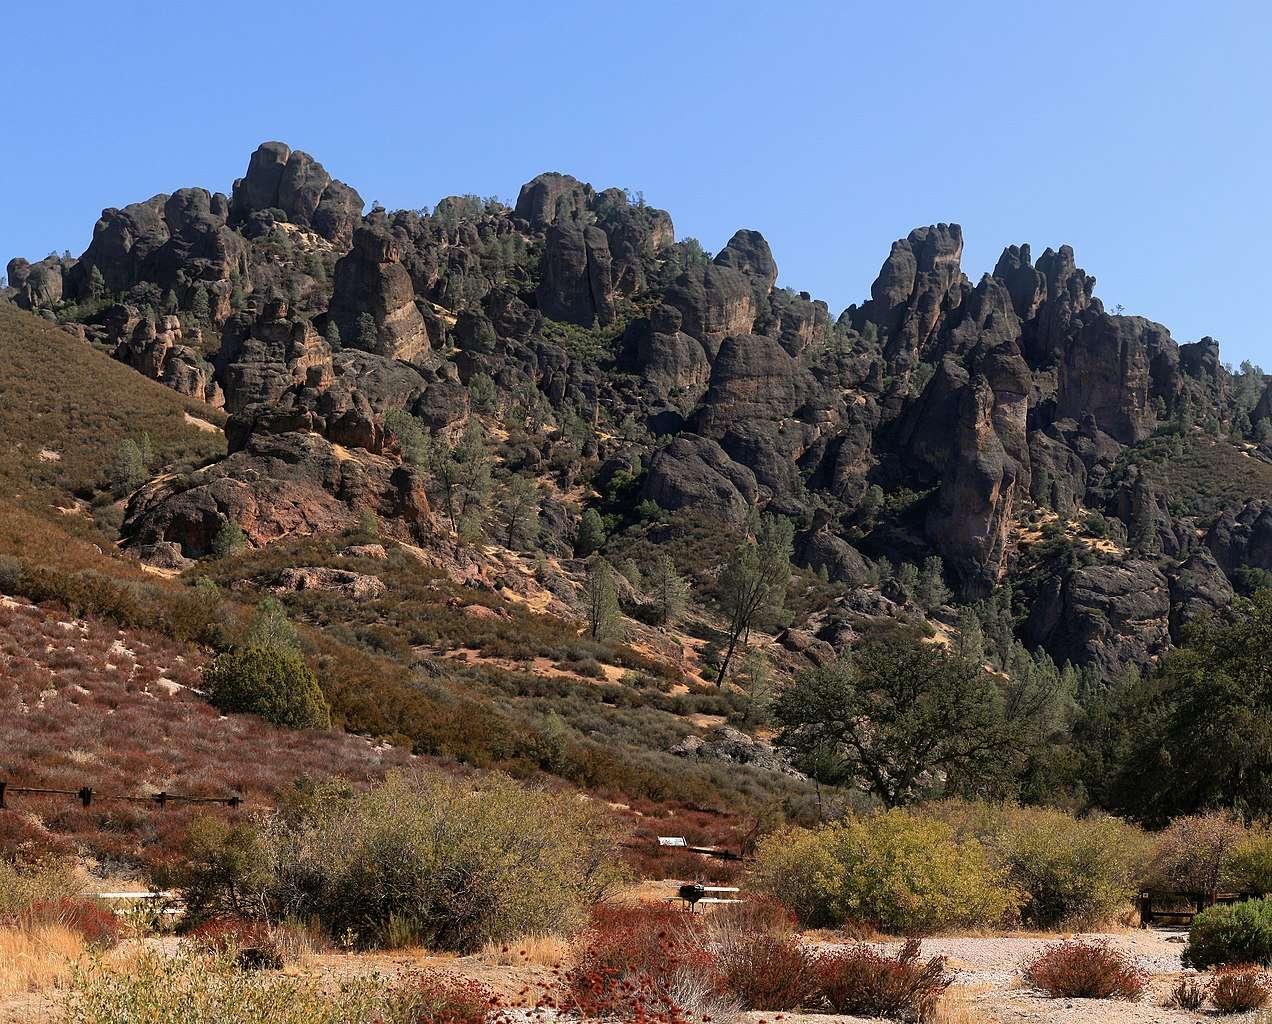 What is the Pinnacles National Park known for?